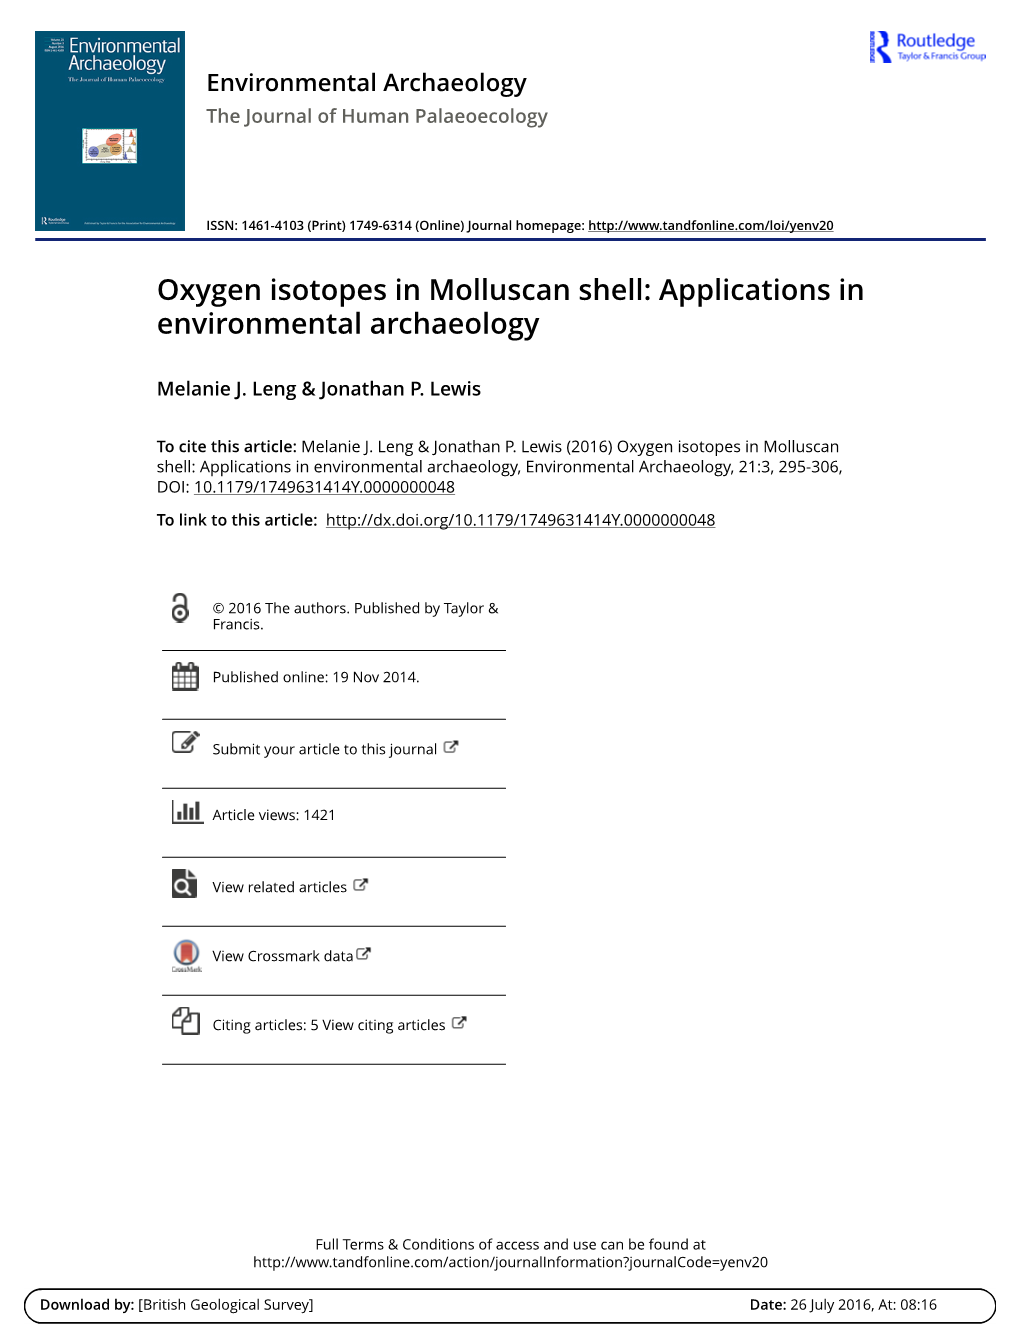 Oxygen Isotopes in Molluscan Shell: Applications in Environmental Archaeology